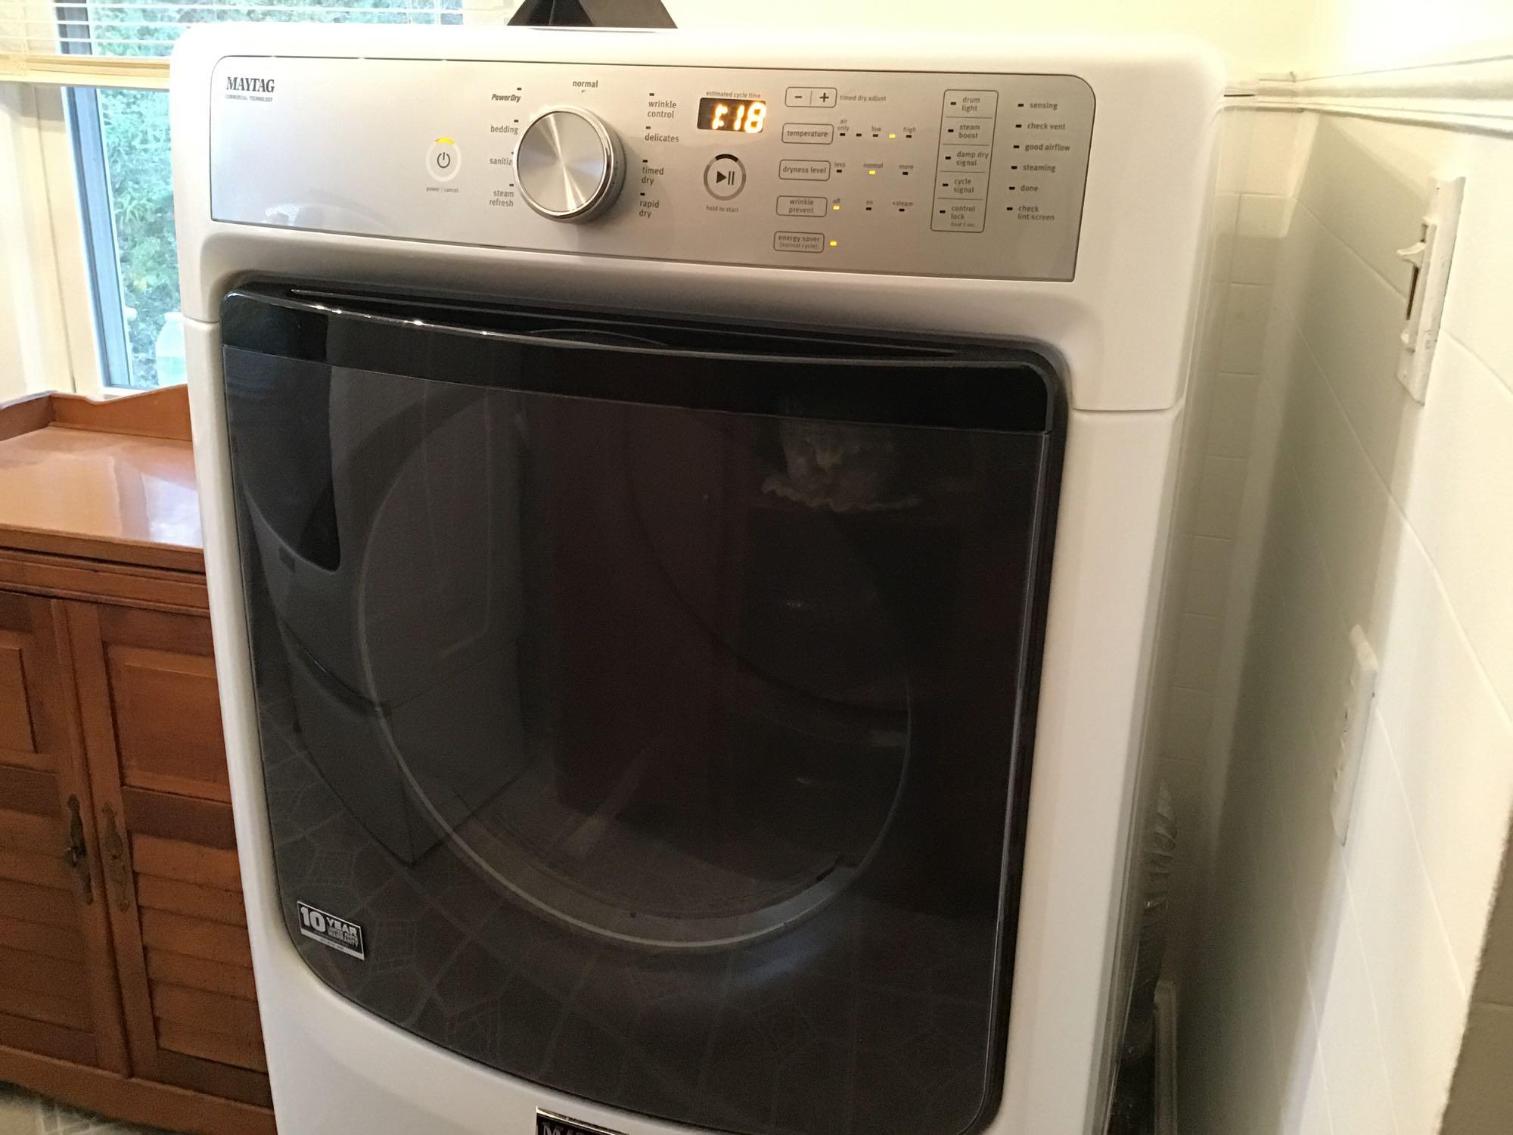 Image for Maytag Dryer - Matches Washer